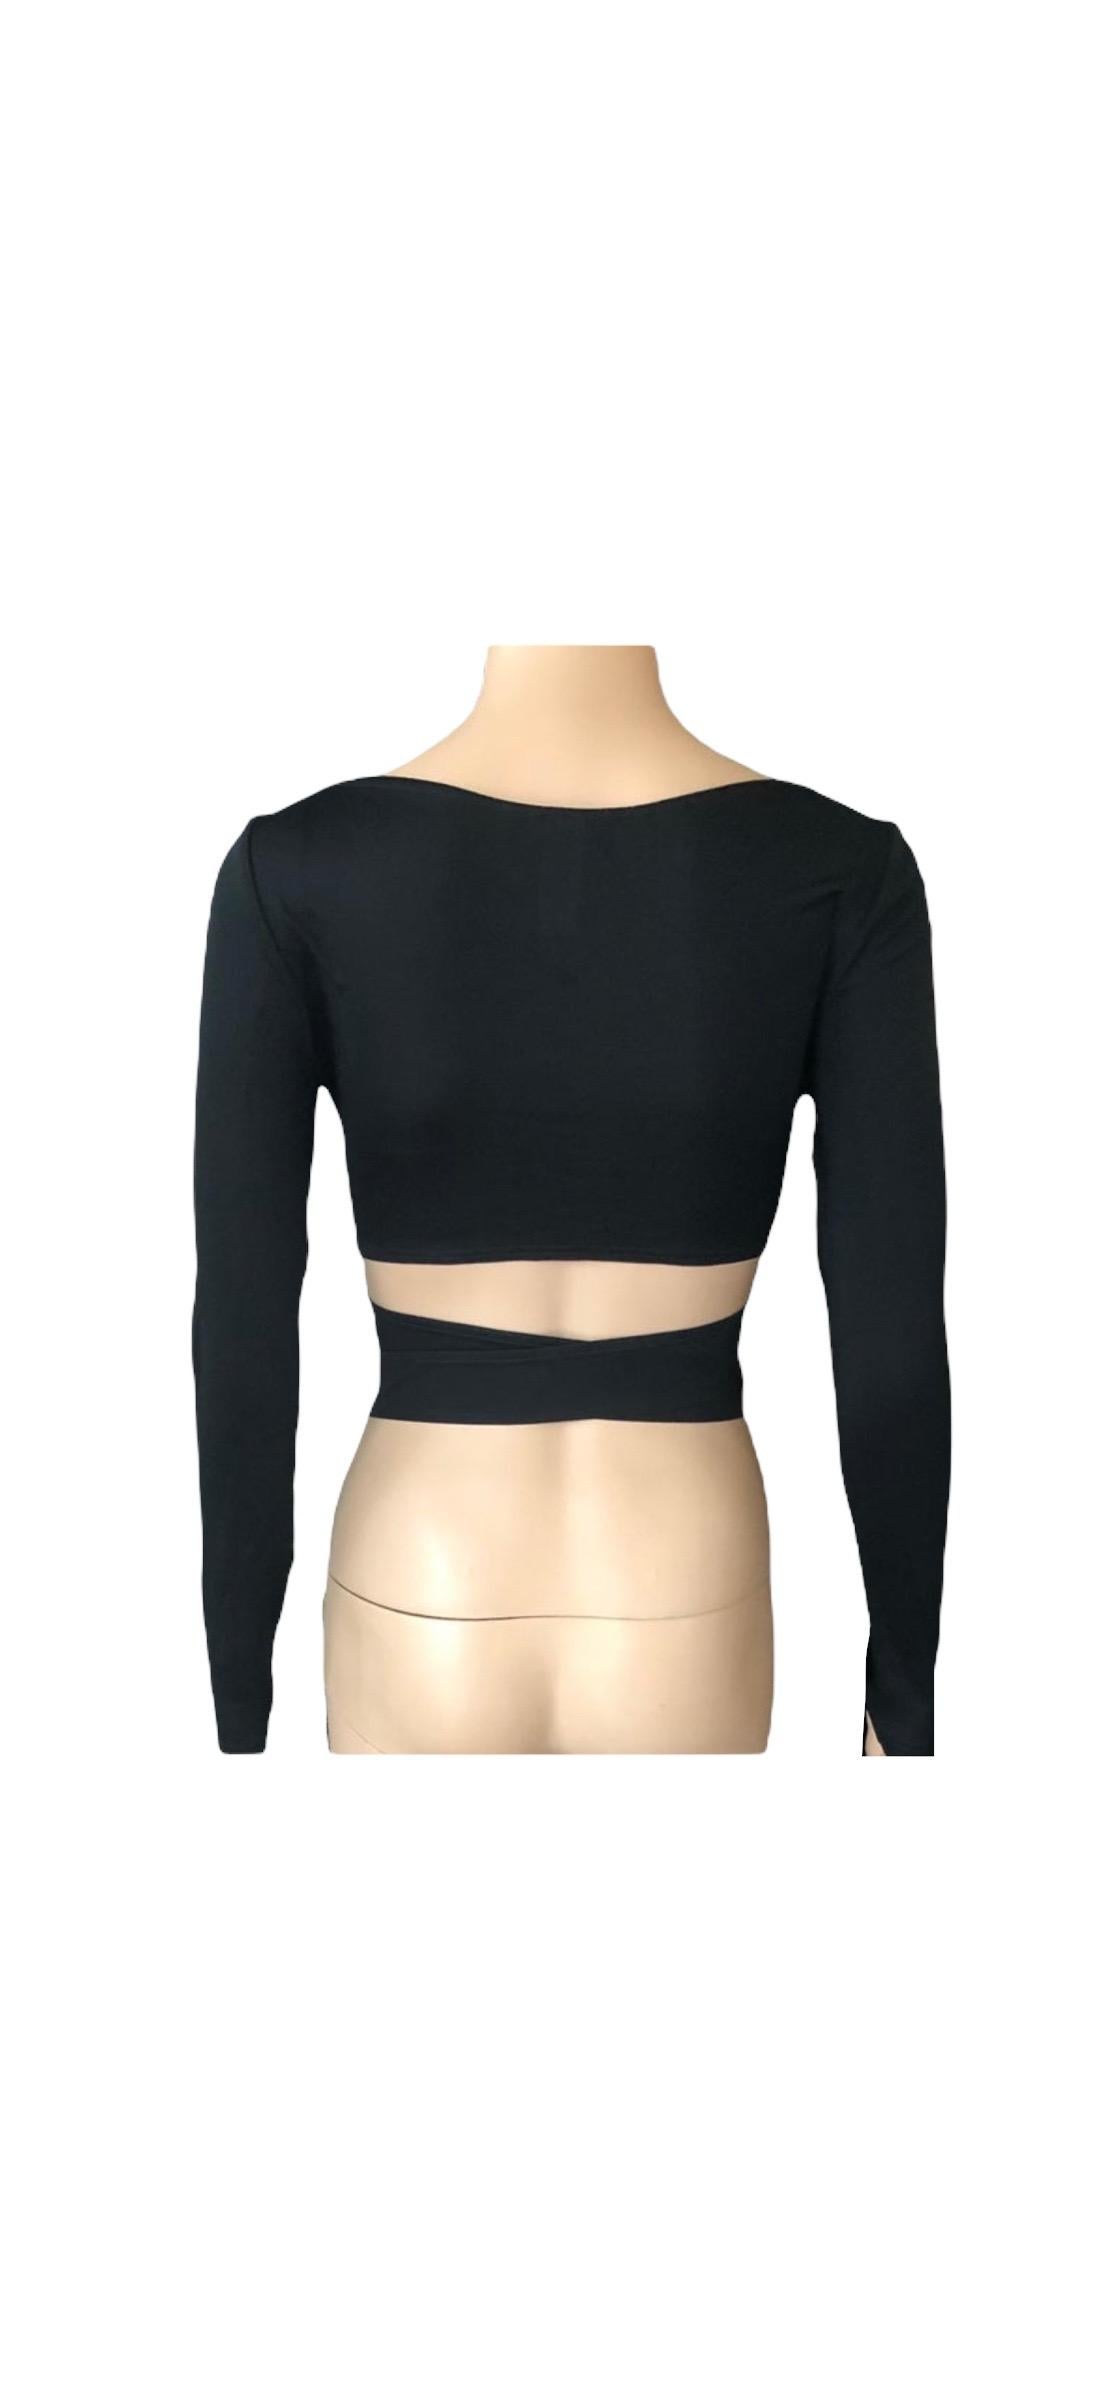 Versace S/S 2005 Embellished Belted Plunging Wrap Crop Top For Sale 6